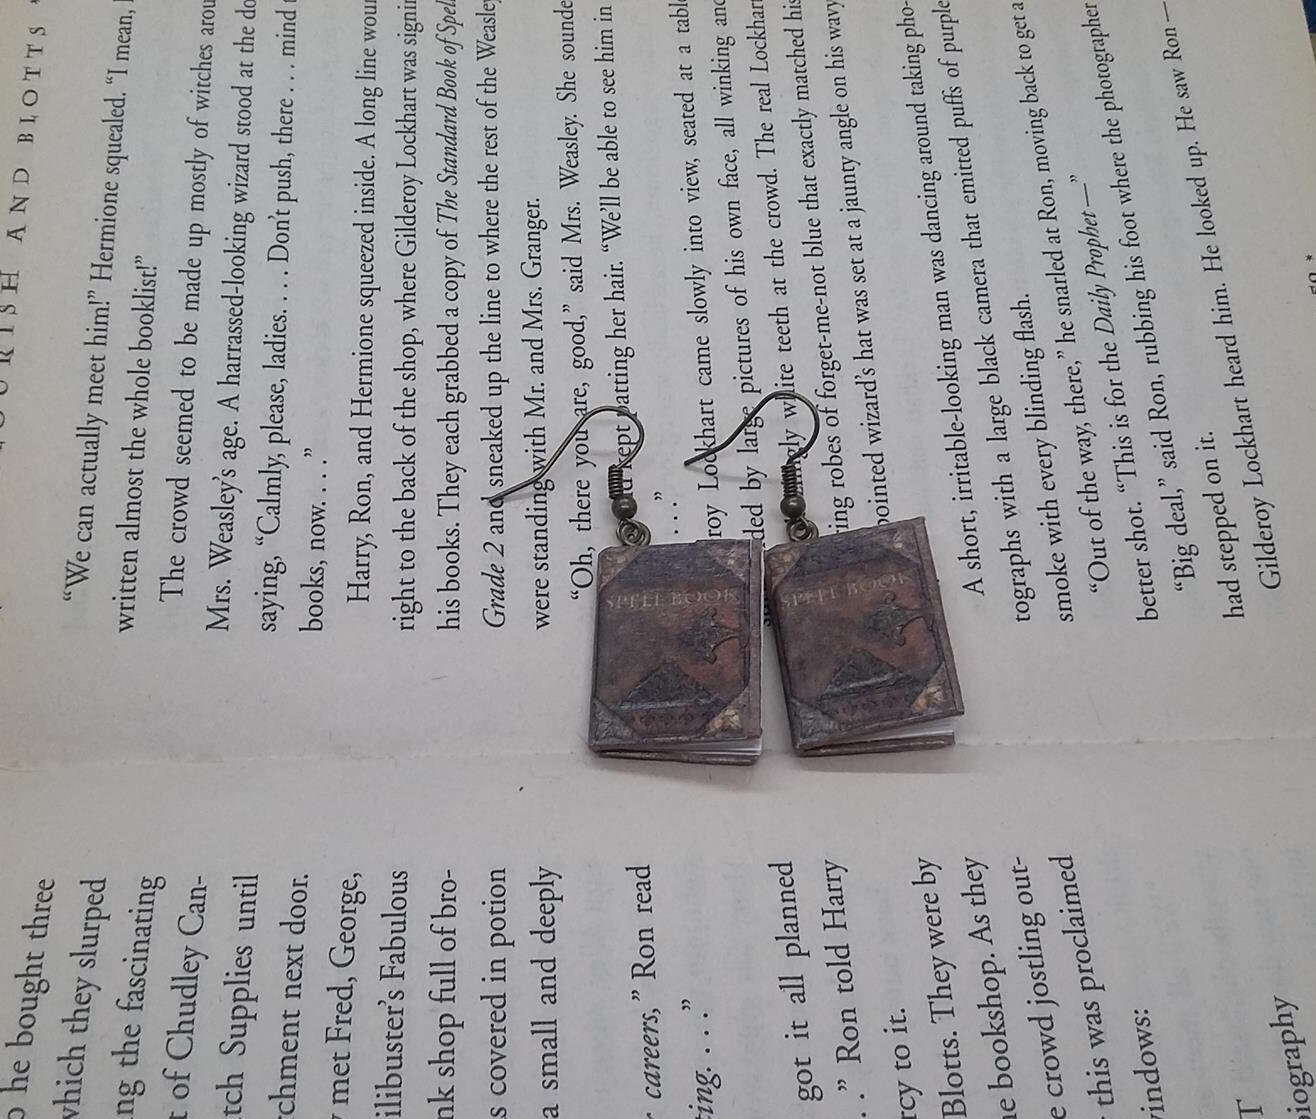 Why we are fascinated by miniature books, Books